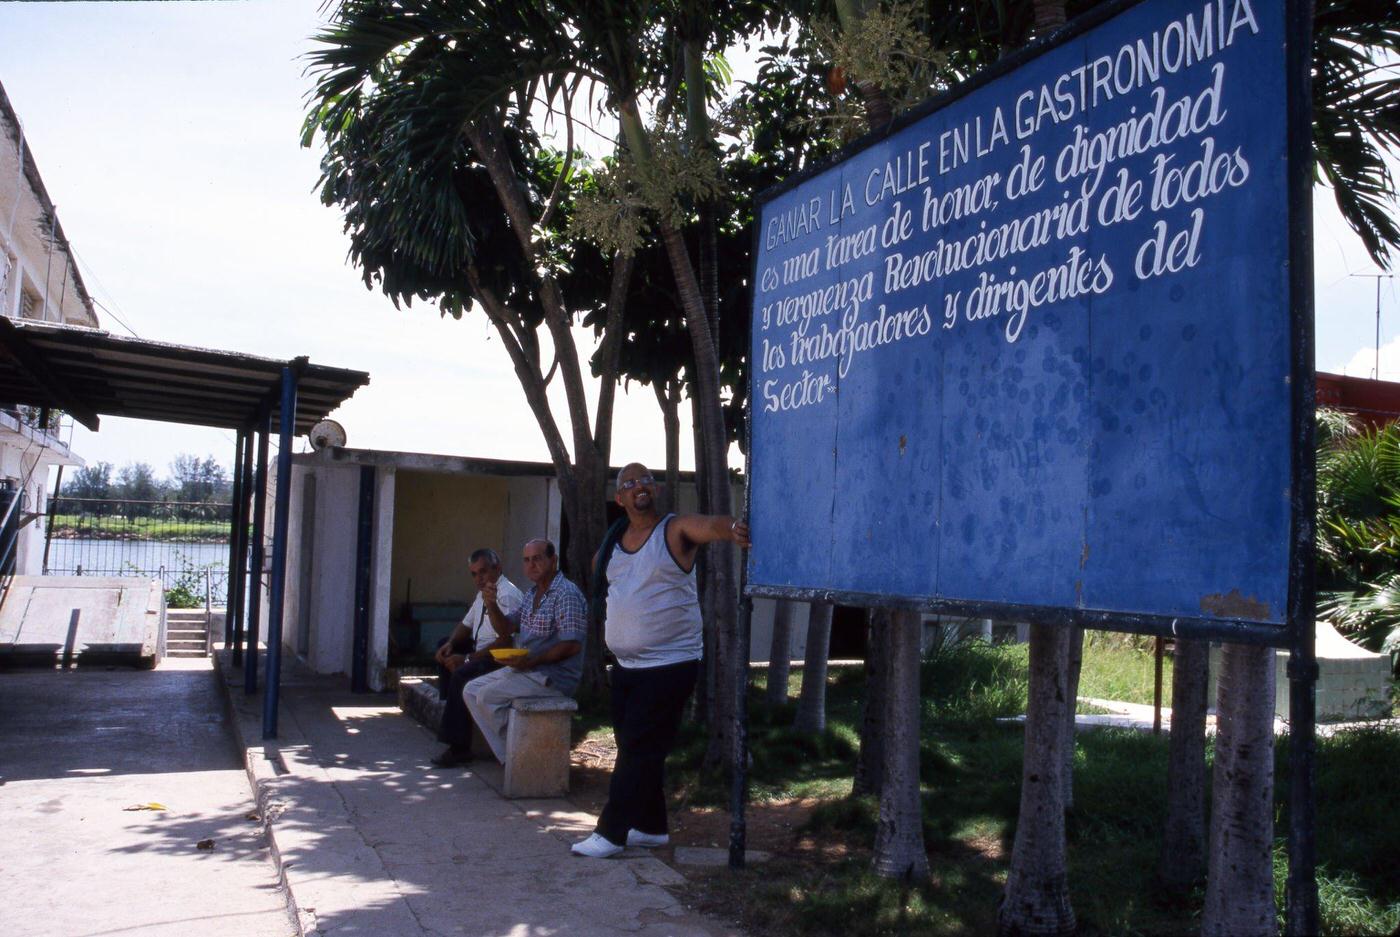 Workers waiting for a bus in front of a poster honoring the value of work in Havana, Cuba, June 1999.